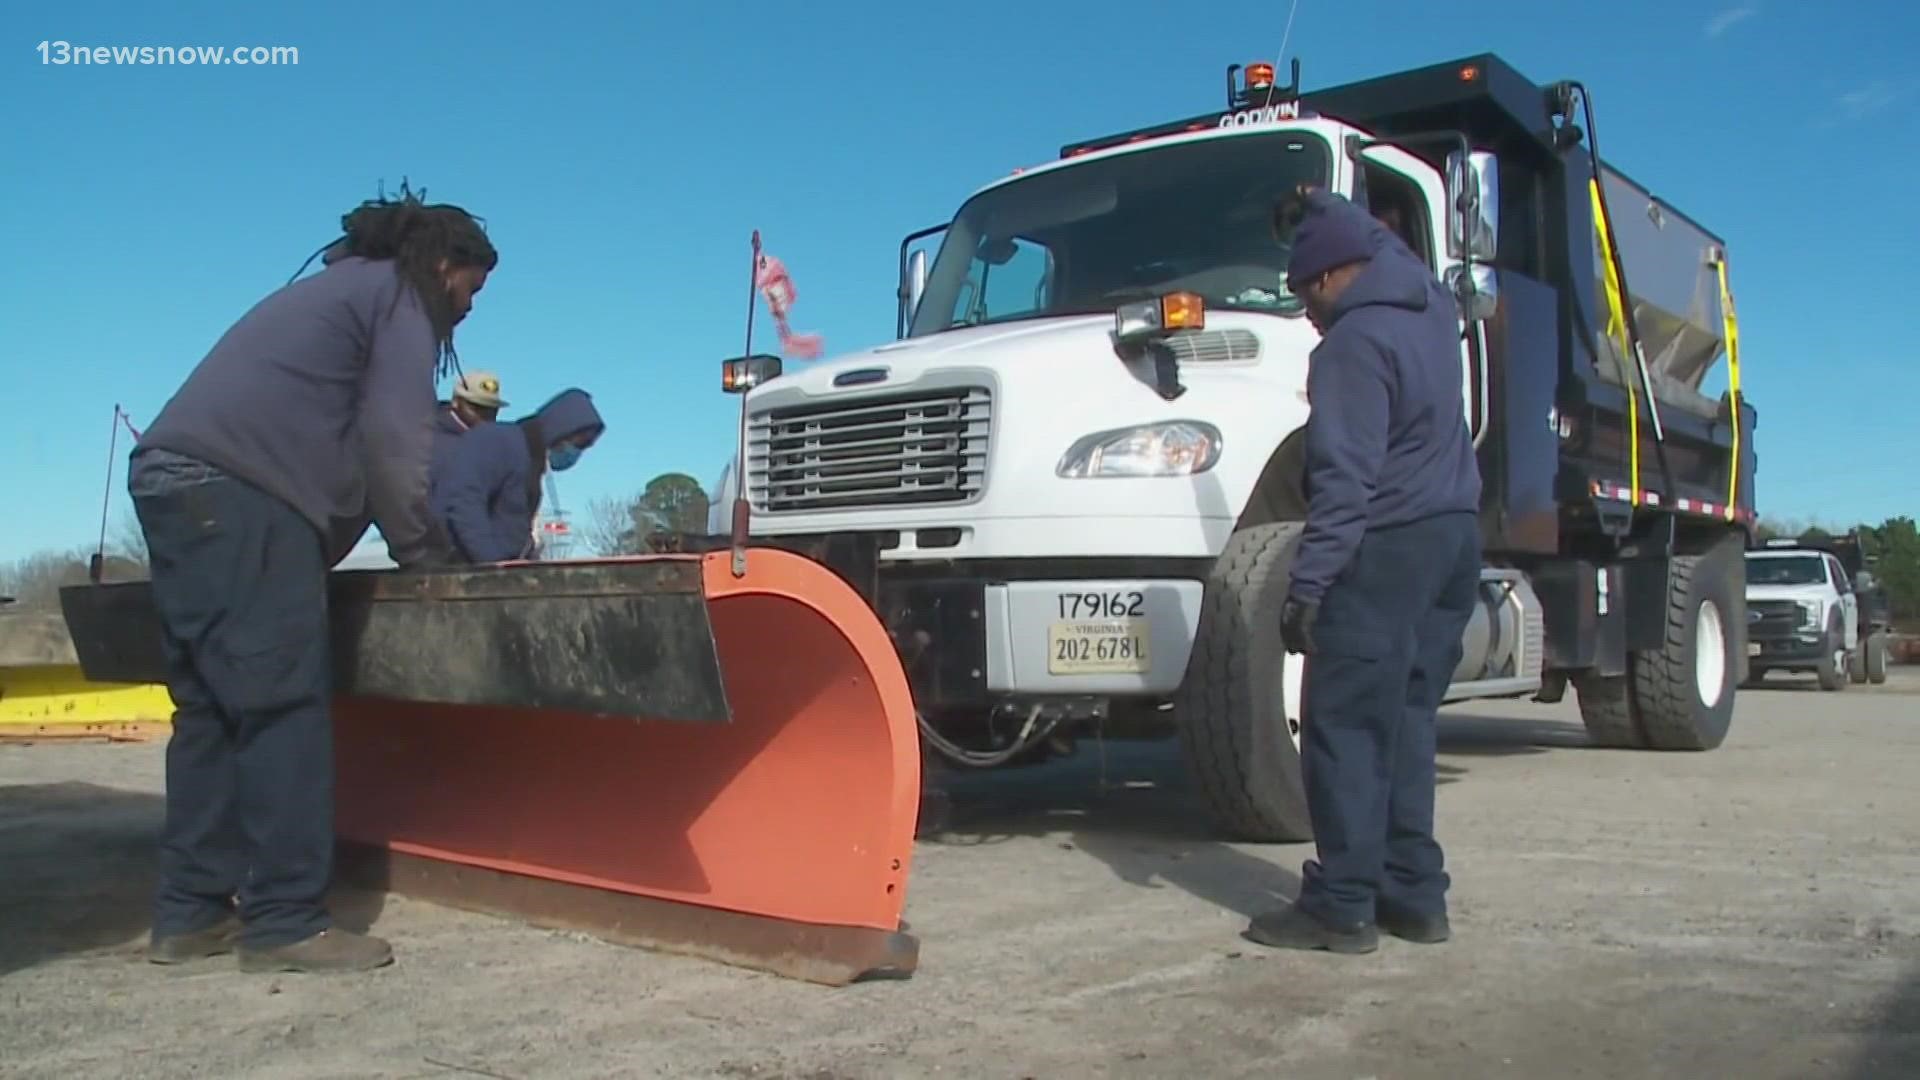 City leaders say they're preparing for it all. Crews are dusting off their snow equipment.